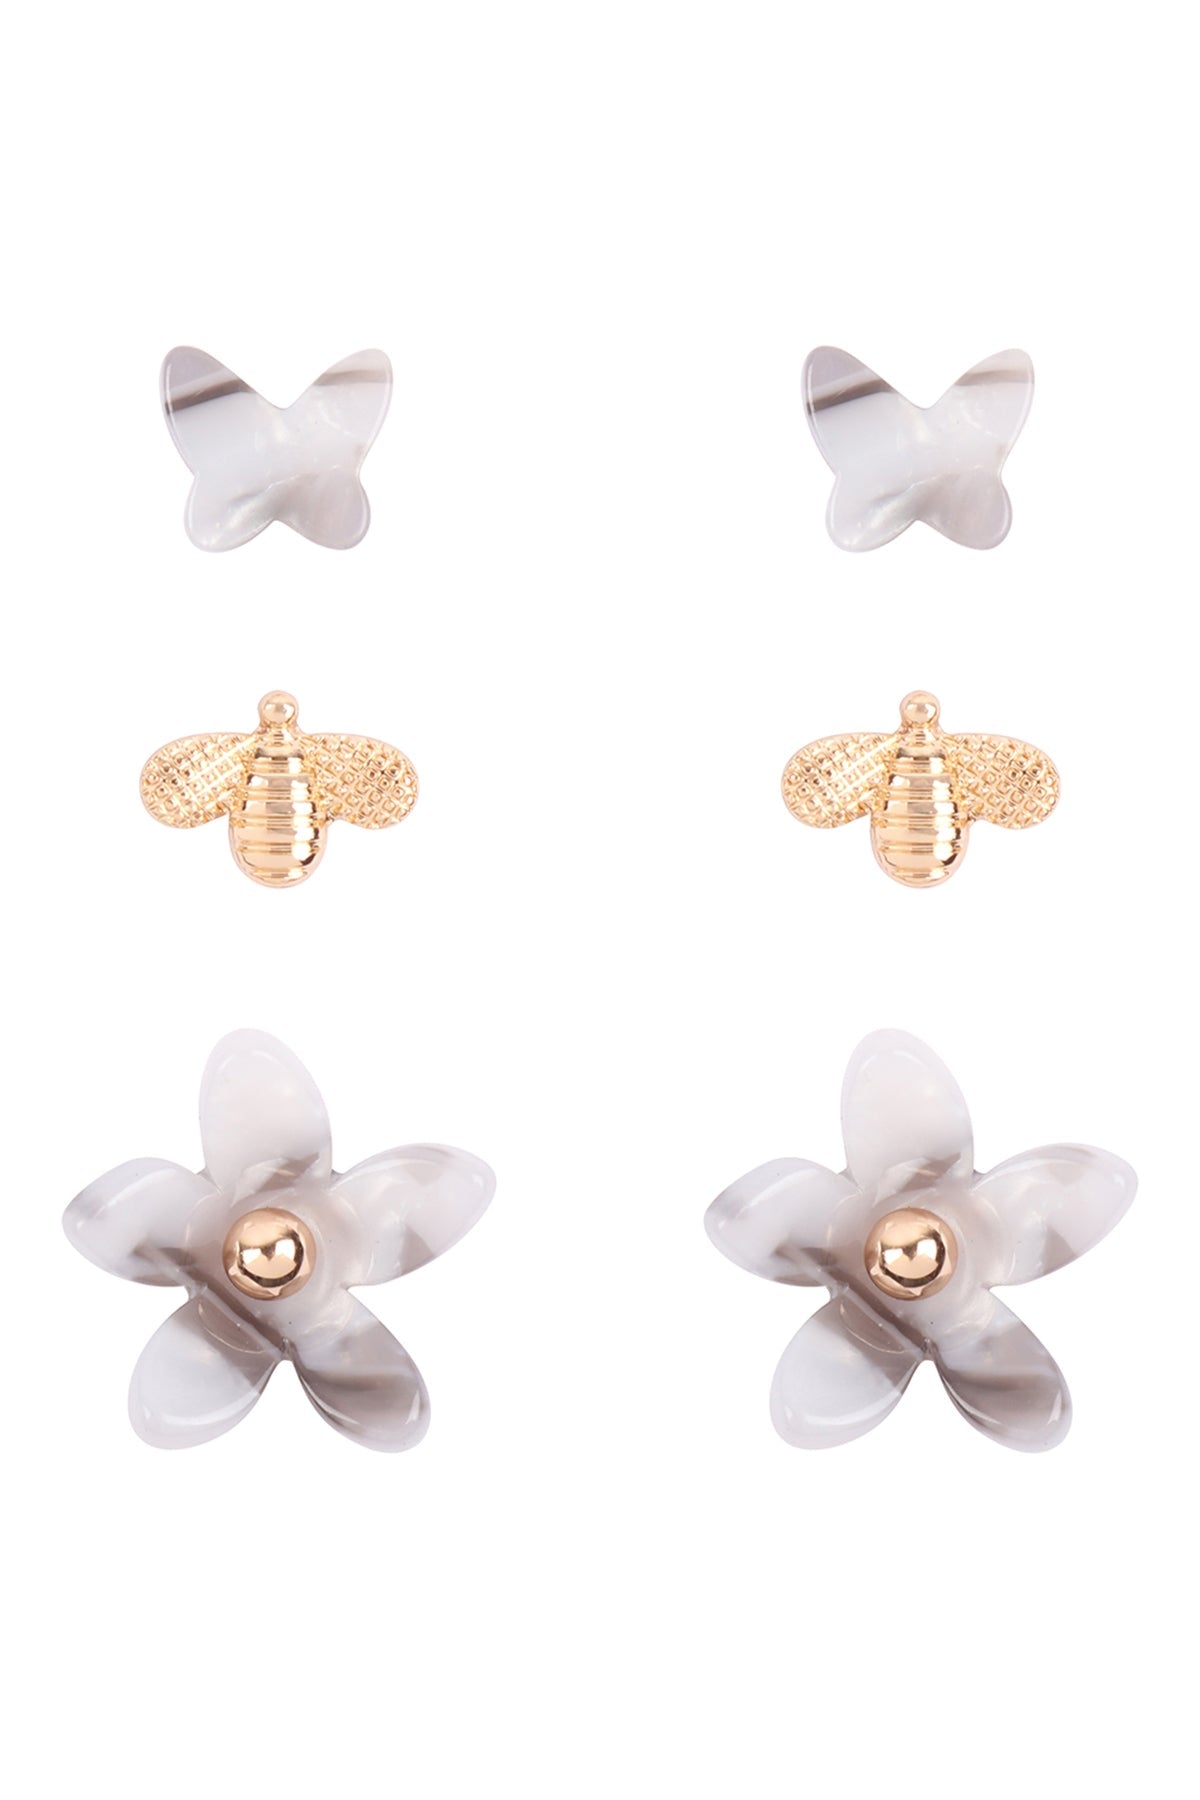 ACETATE 3SET BUTTERFLY AND BEE EARRINGS (NOW $1.25 ONLY!)